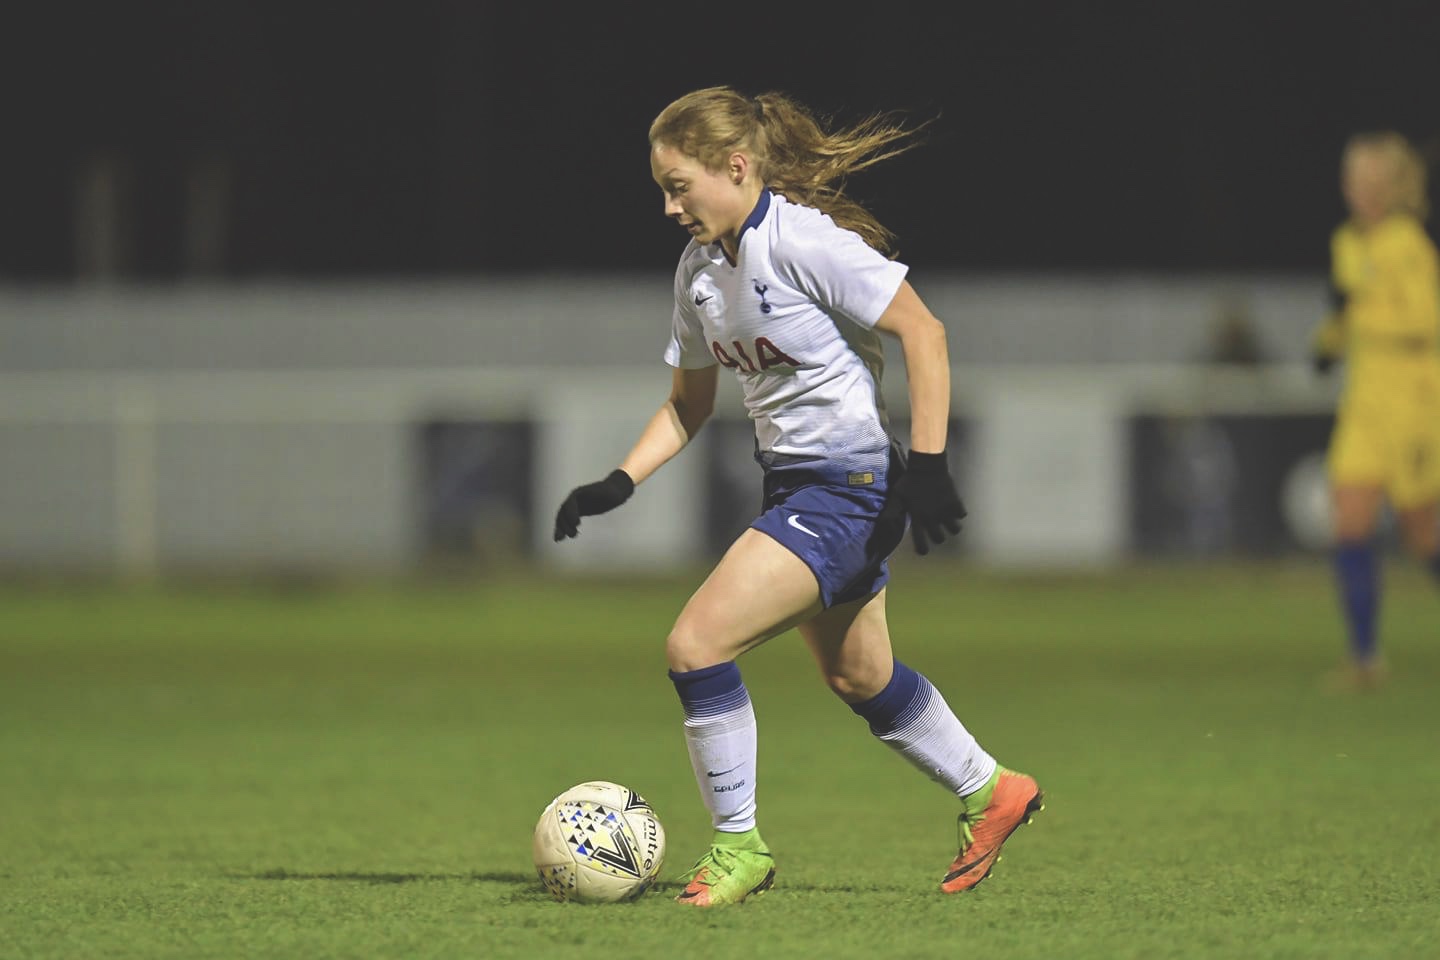 Angela Addison in action for Spurs. Photo from @THLFCofficial